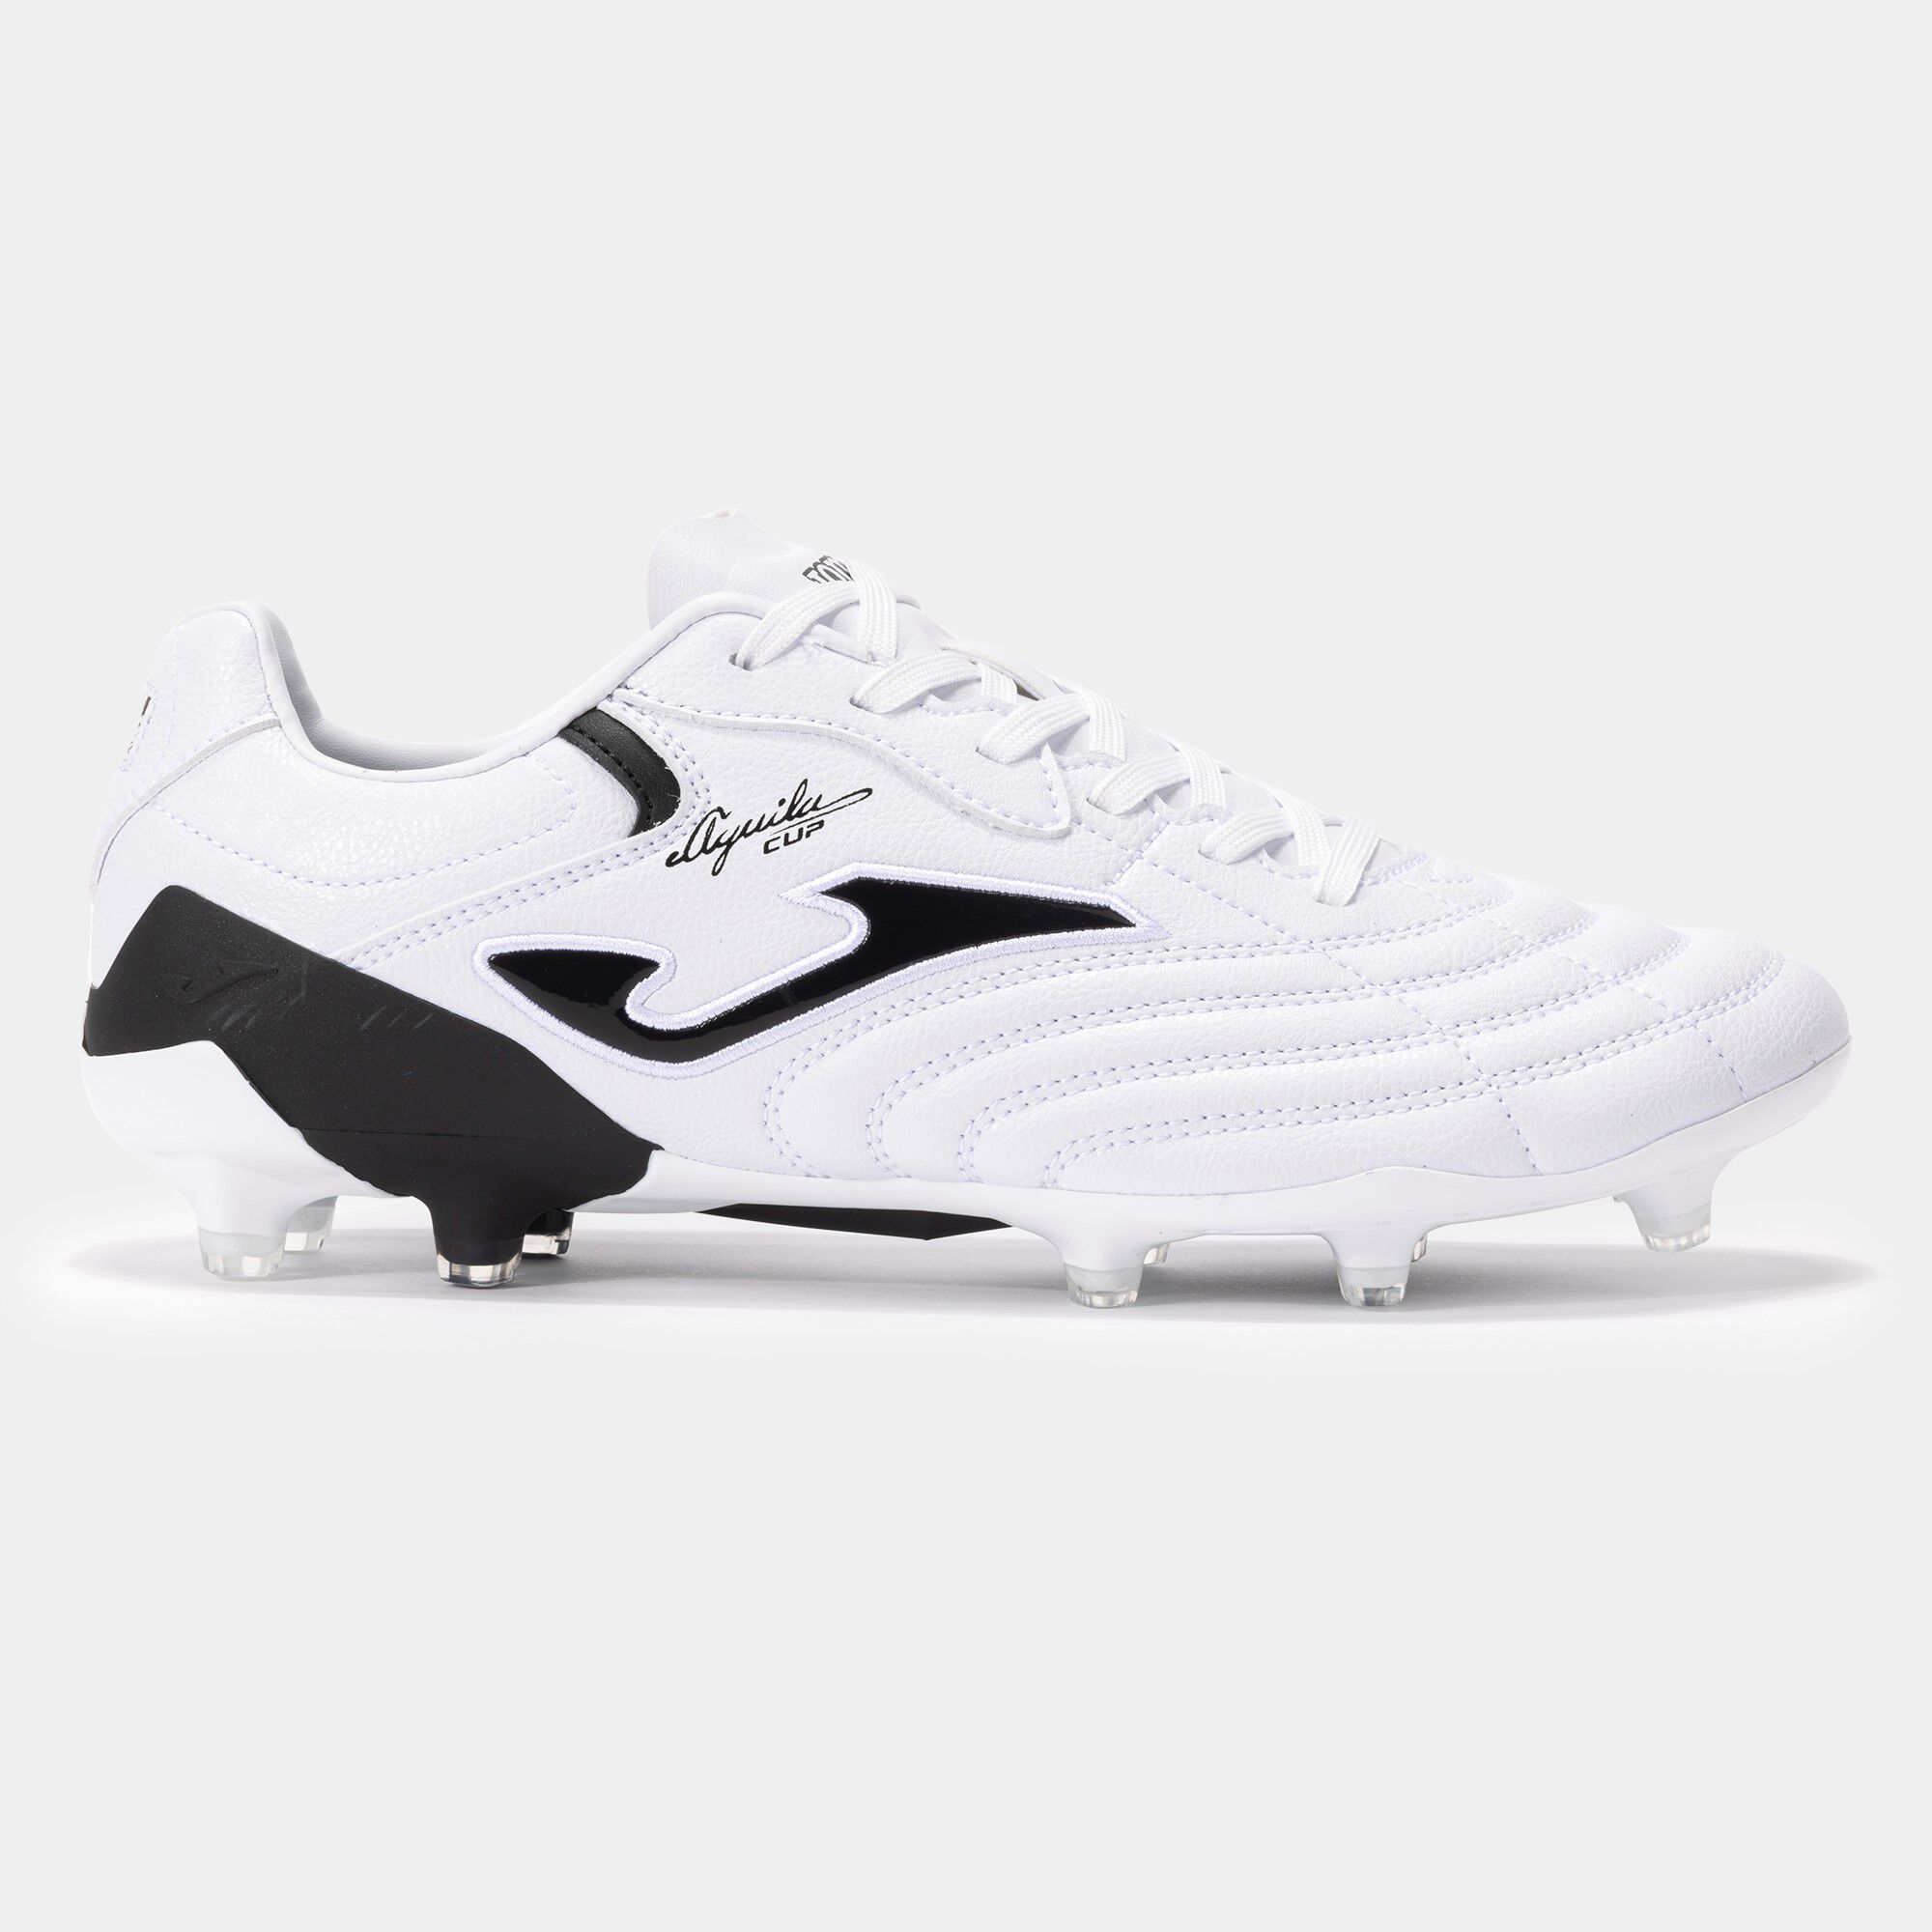 Football boots Aguila Cup 24 firm ground FG white black